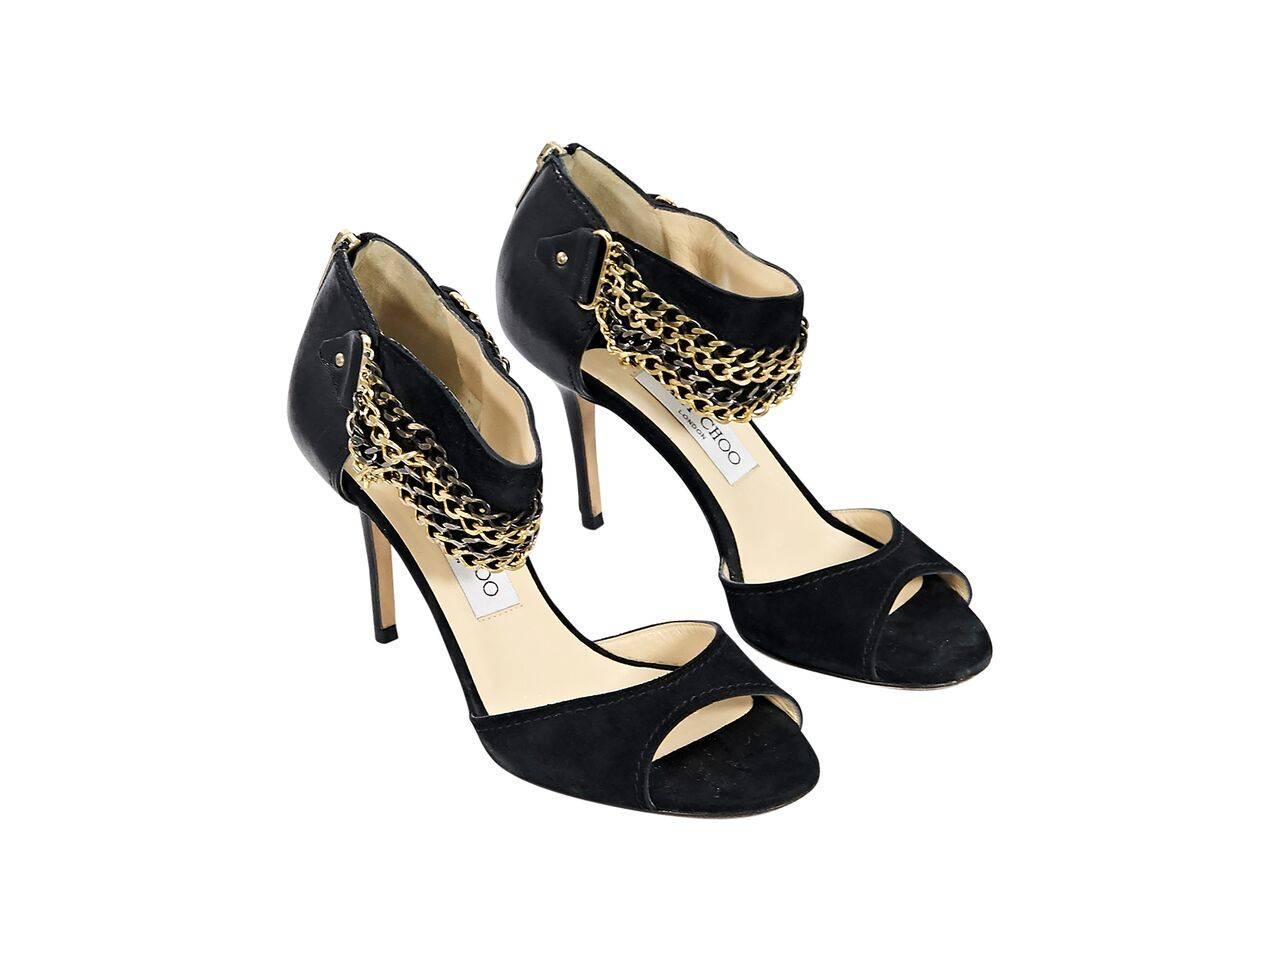 Product details:  Black leather and suede pumps by Jimmy Choo.  Ankle strap embellished with multiple chains.  Open toe.  Back zip closure.  Multi-tone hardware.  
Condition: Pre-owned. Very good.
Est. Retail $ 675.00